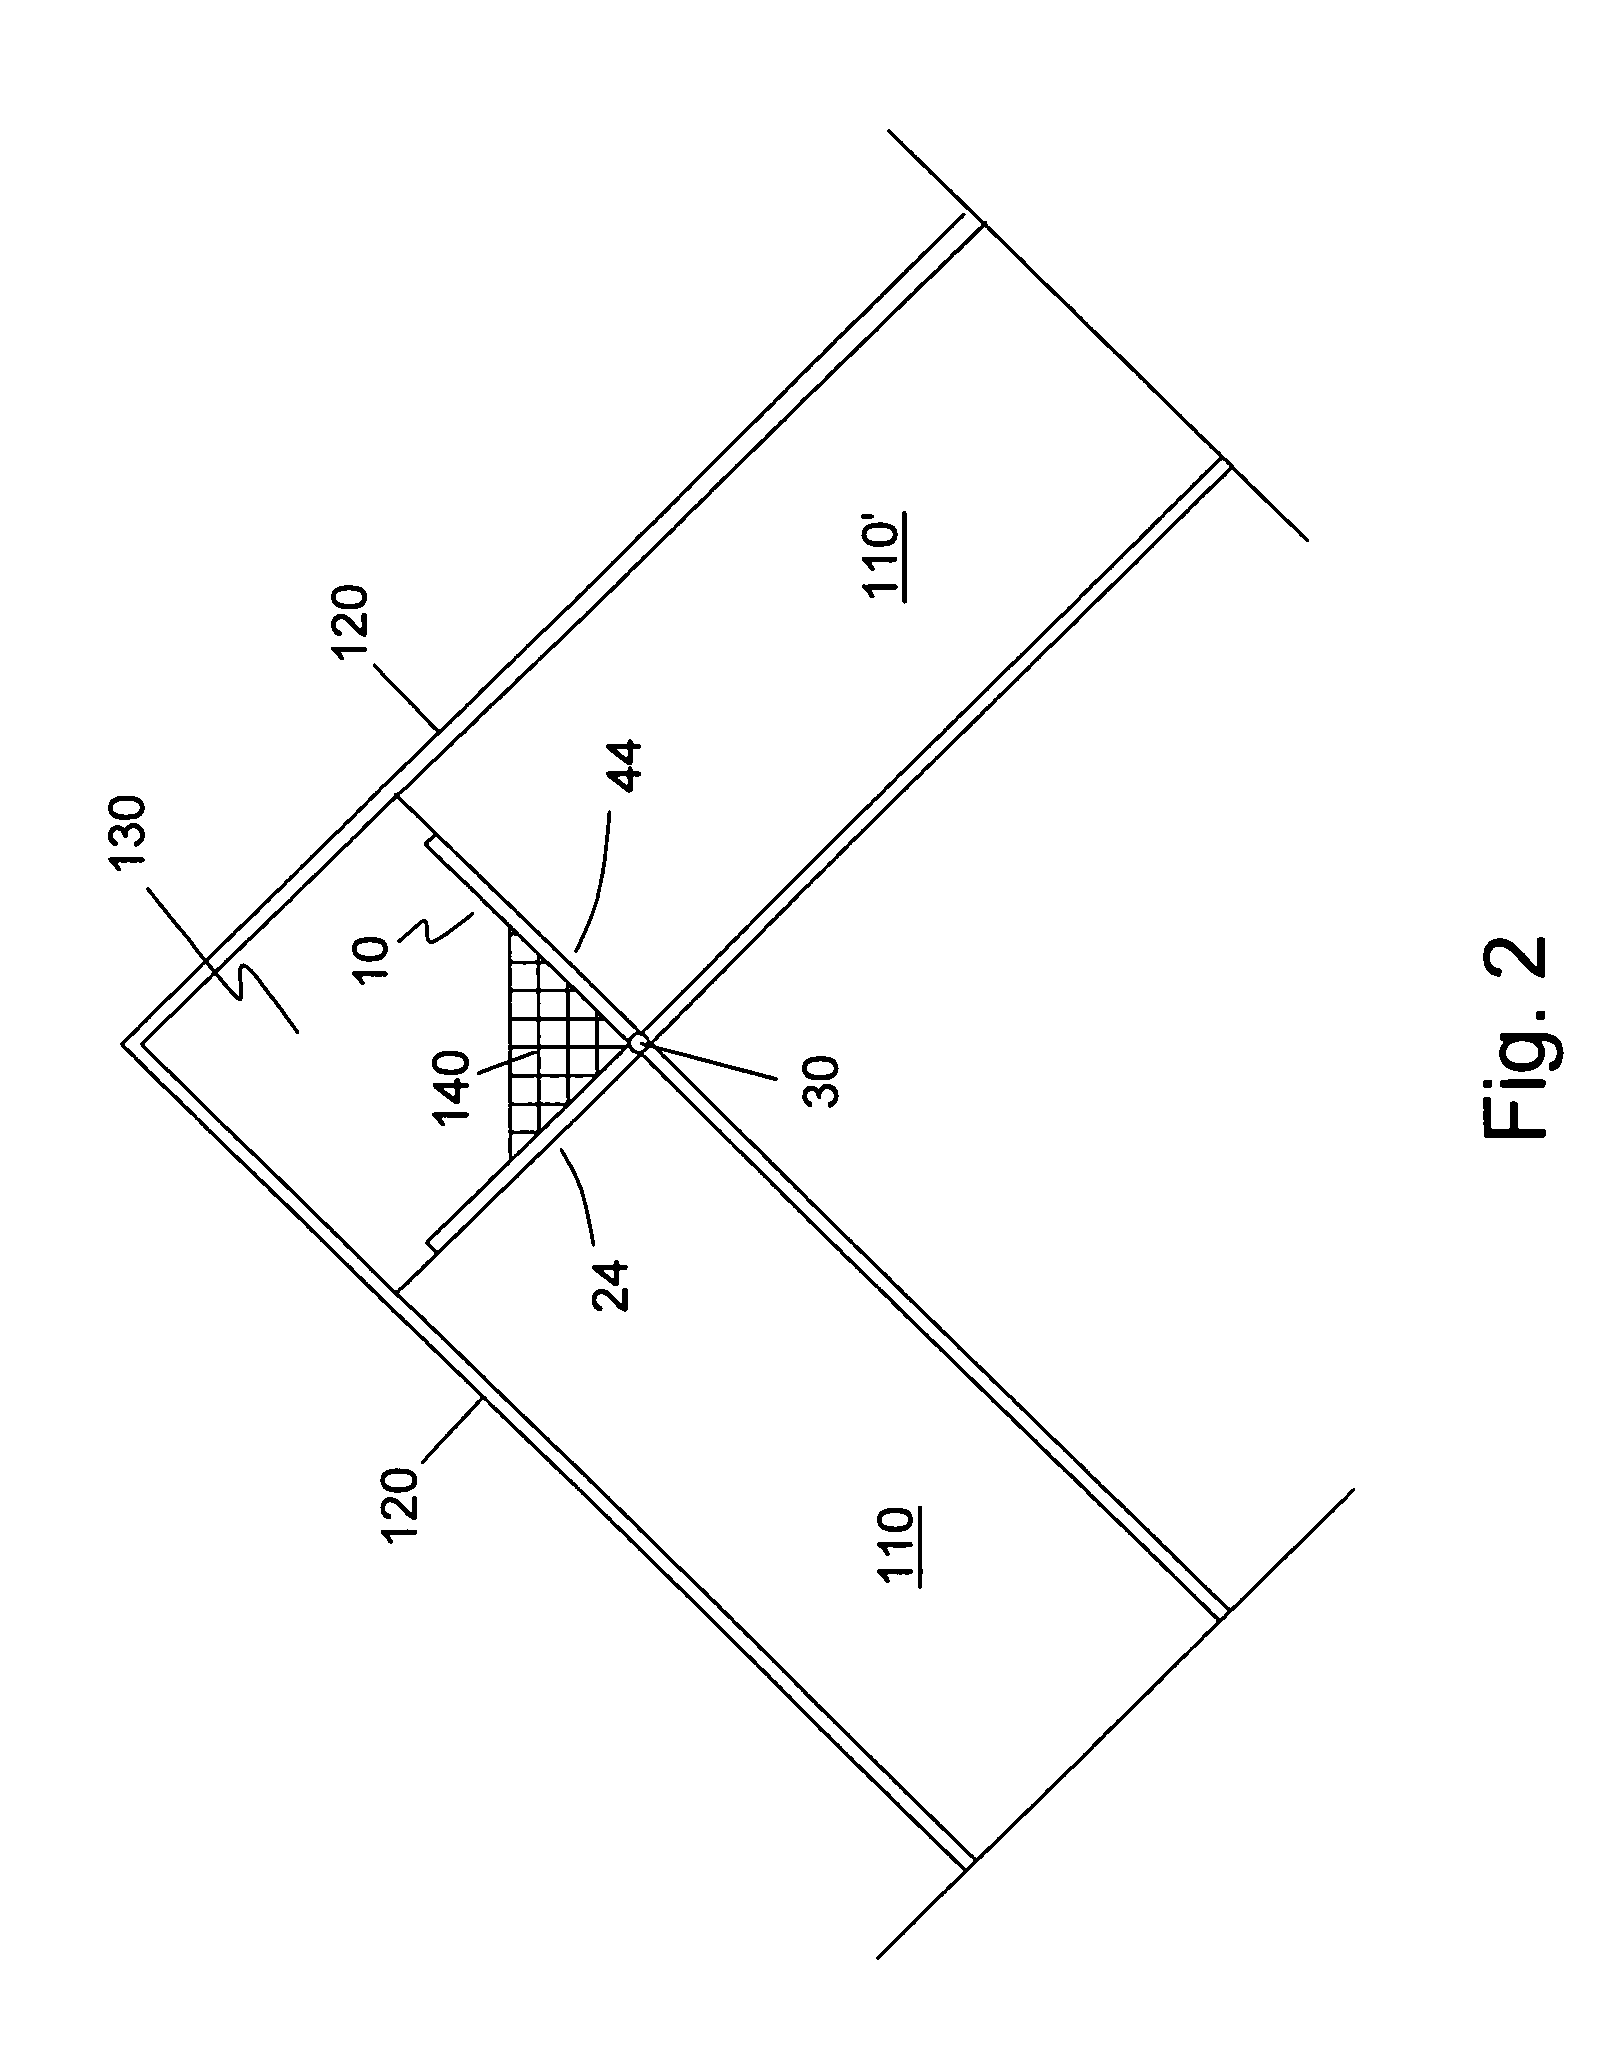 Method of creating a roof venting space